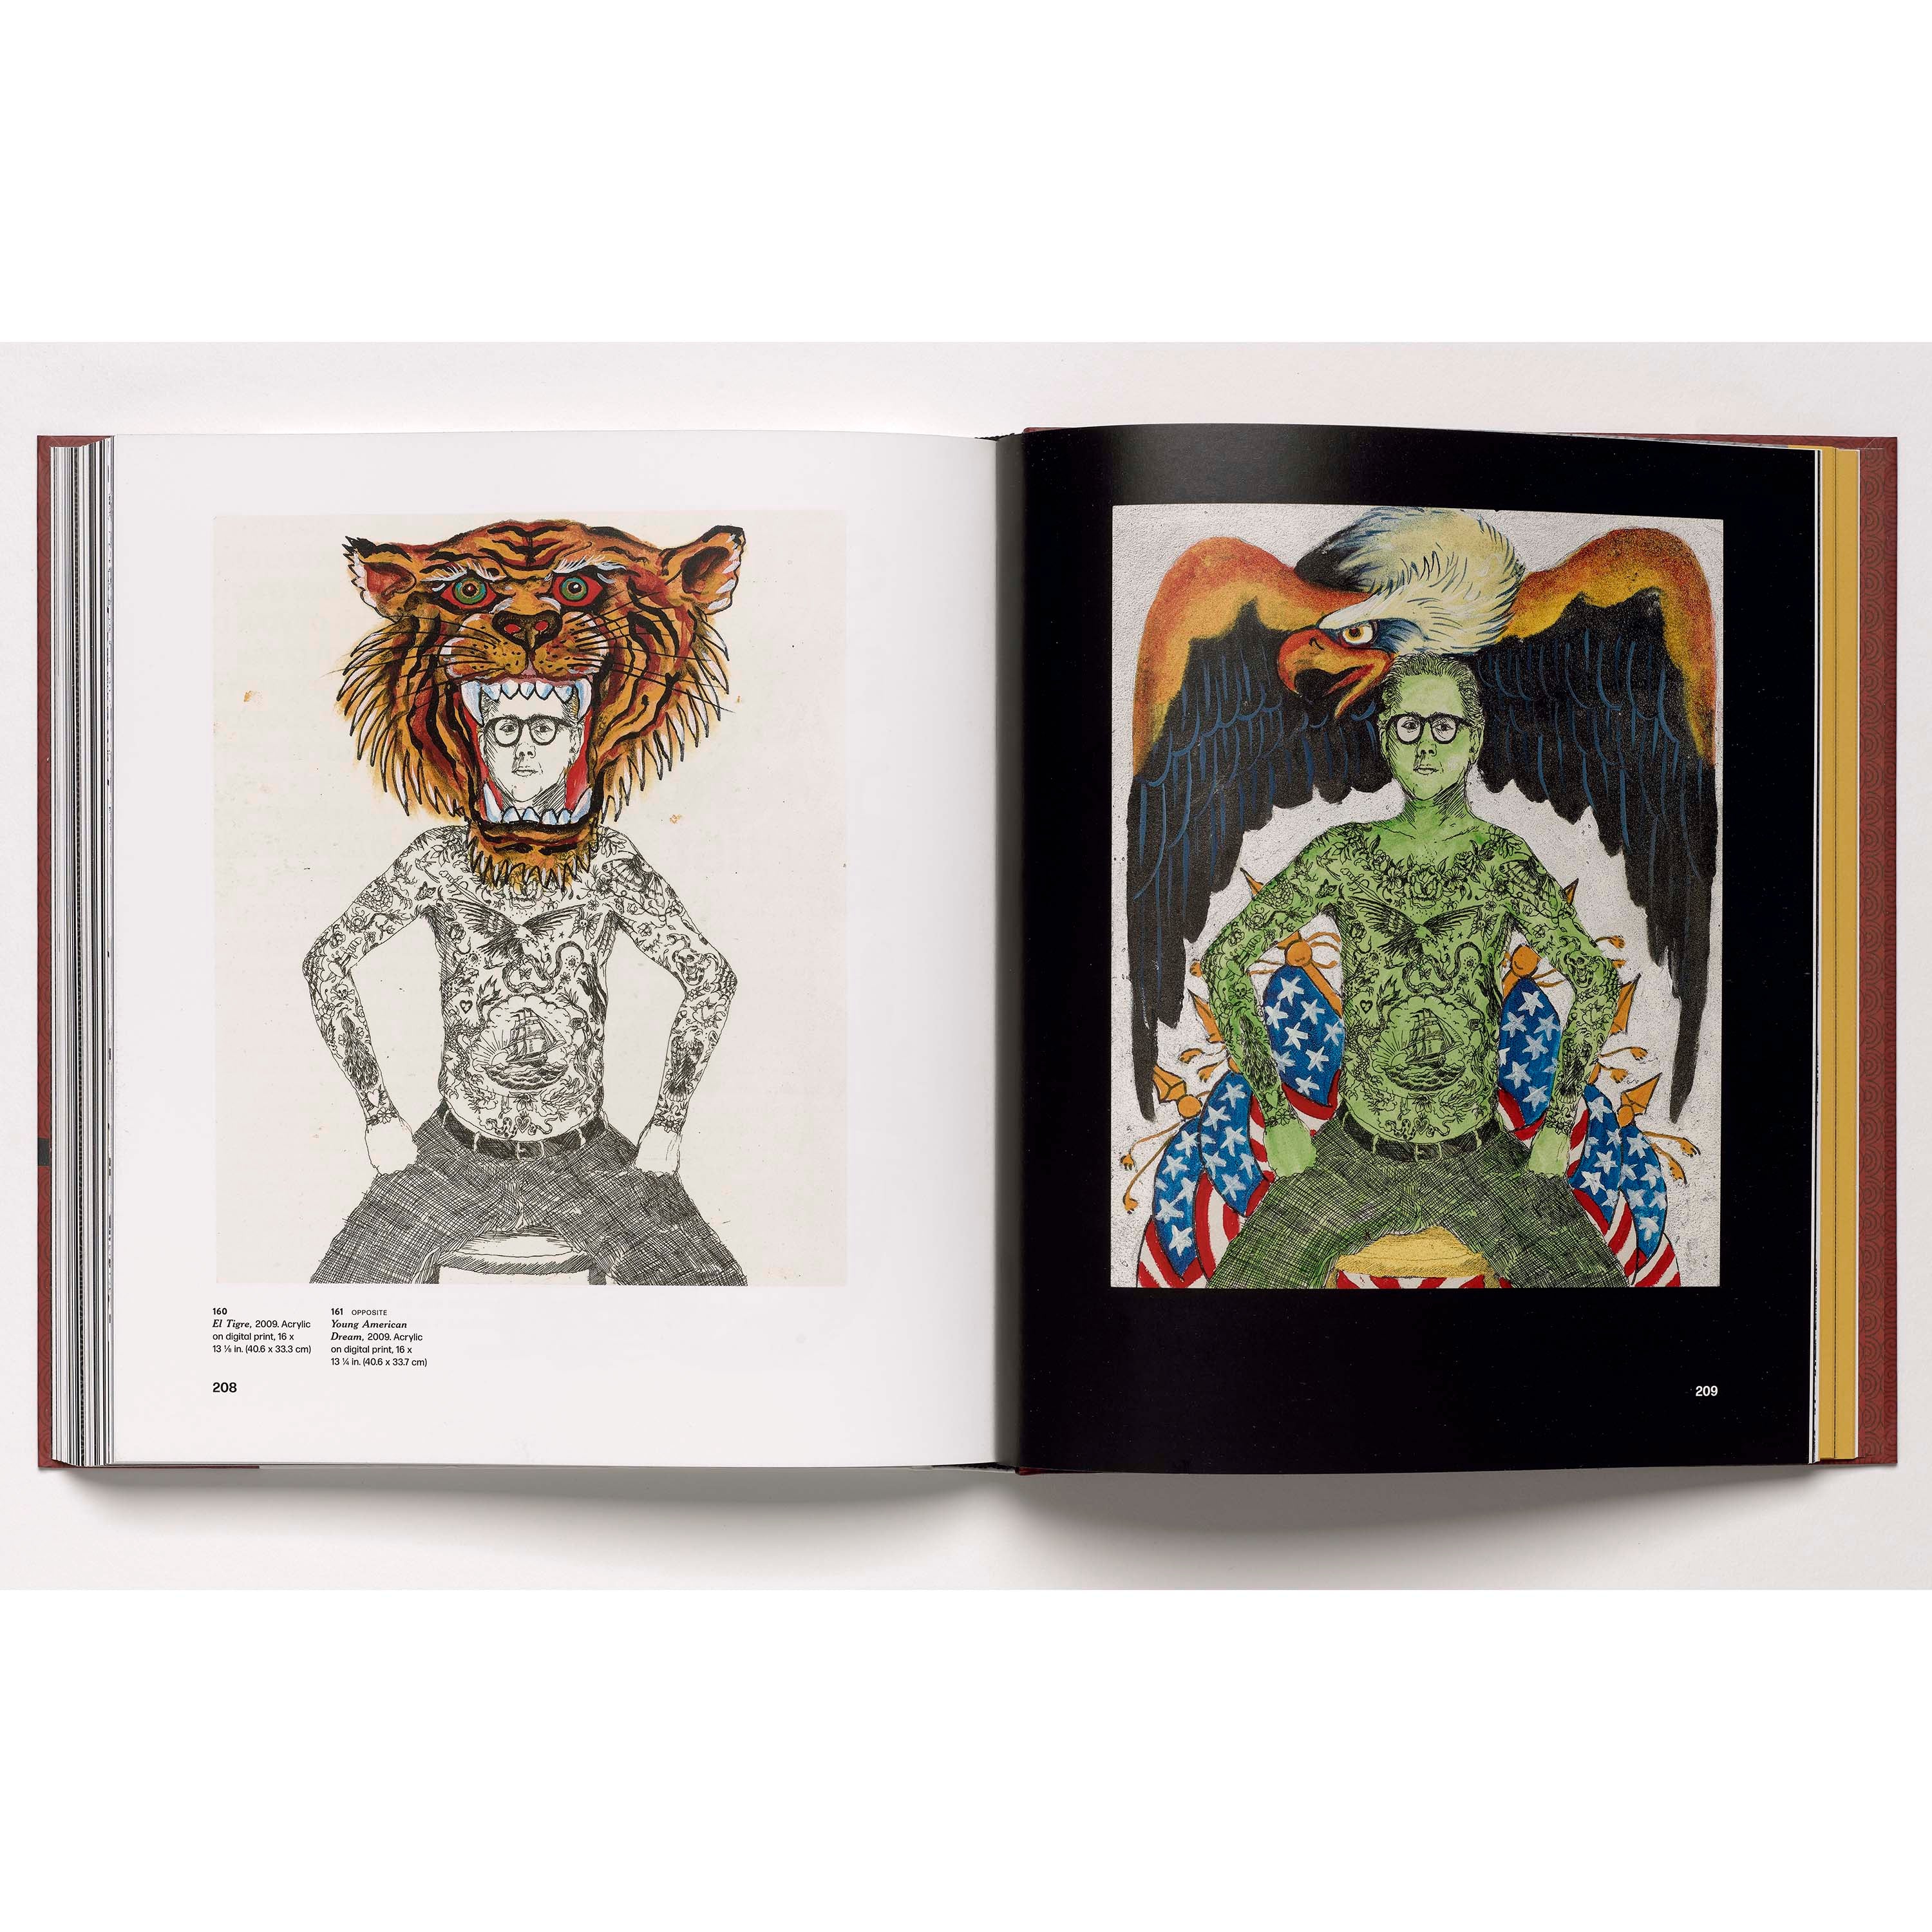 Ed Hardy: Deeper Than Skin - de Young & Legion of Honor Museum Stores